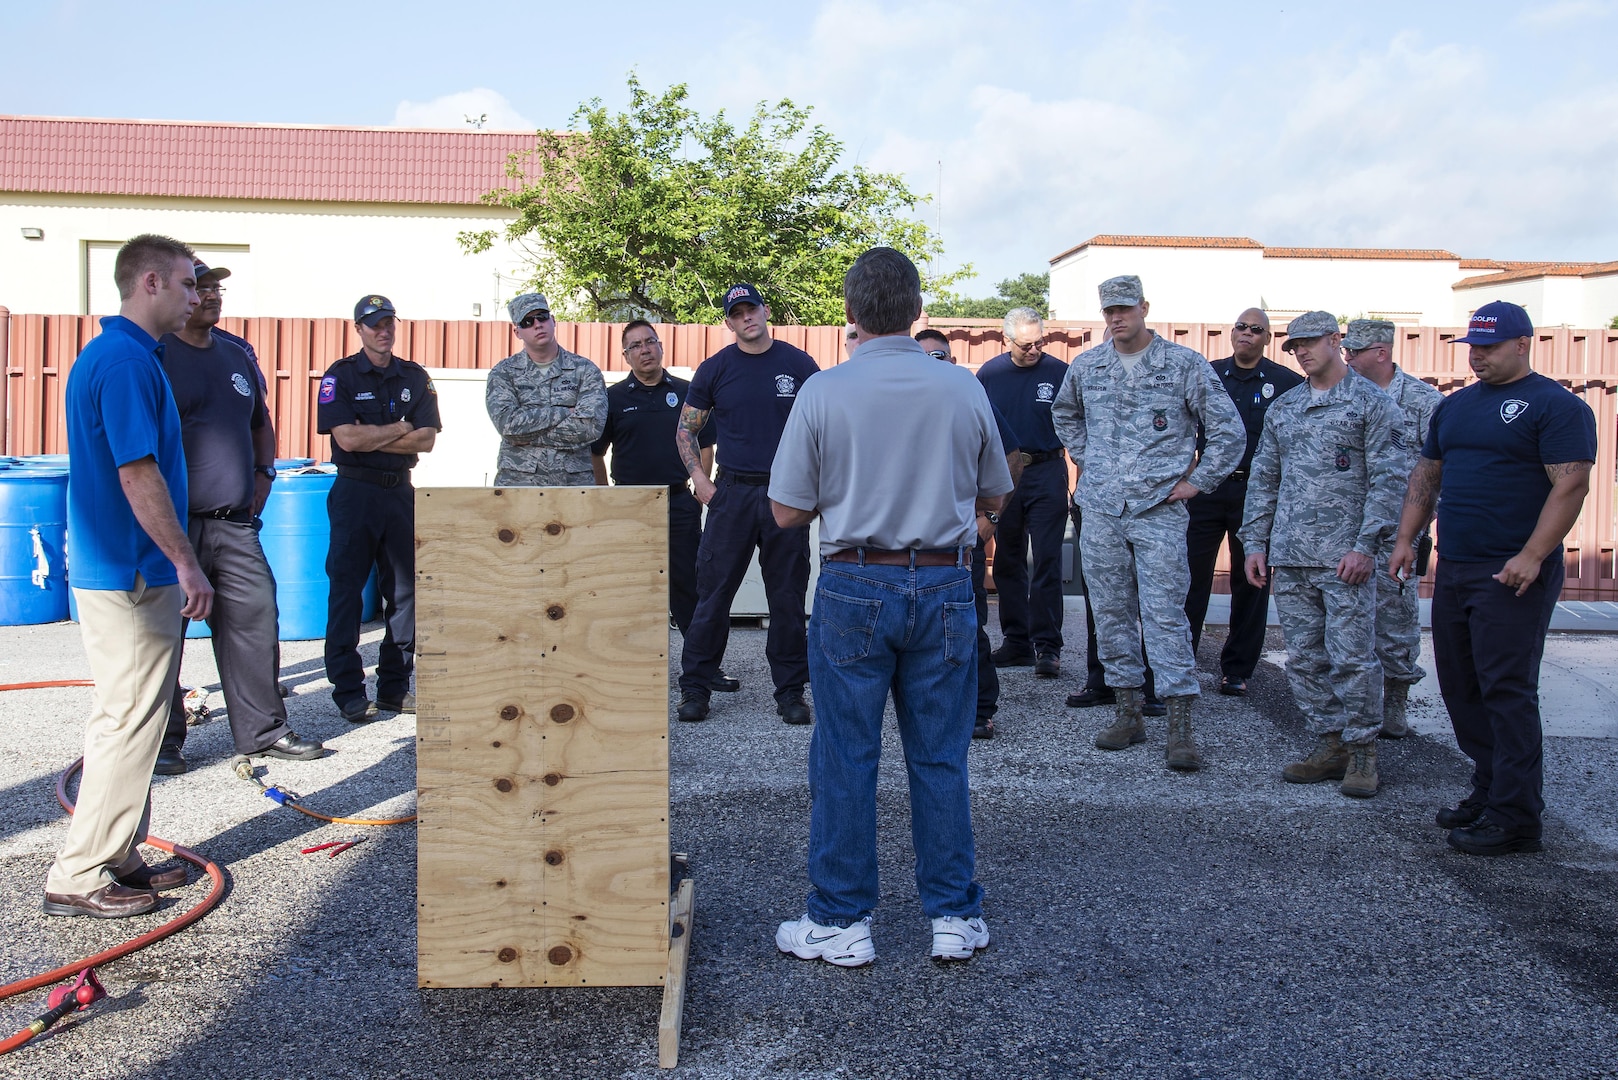 Bret Stohr, Insource fire service consultant and U.S. Air Force retired operations assistant chief, gives instruction to members from the Joint Base San Antonio Fire Department, Universal City Fire Department, Live Oak Fire Department and the 902nd Security Forces Squadron at JBSA-Randolph June 22, 2016. Stohr received Department of Defense Firefighter of The Year, U.S. Air Force Fire Officer and Chief Fire Officer of The Year distinctions while serving. 